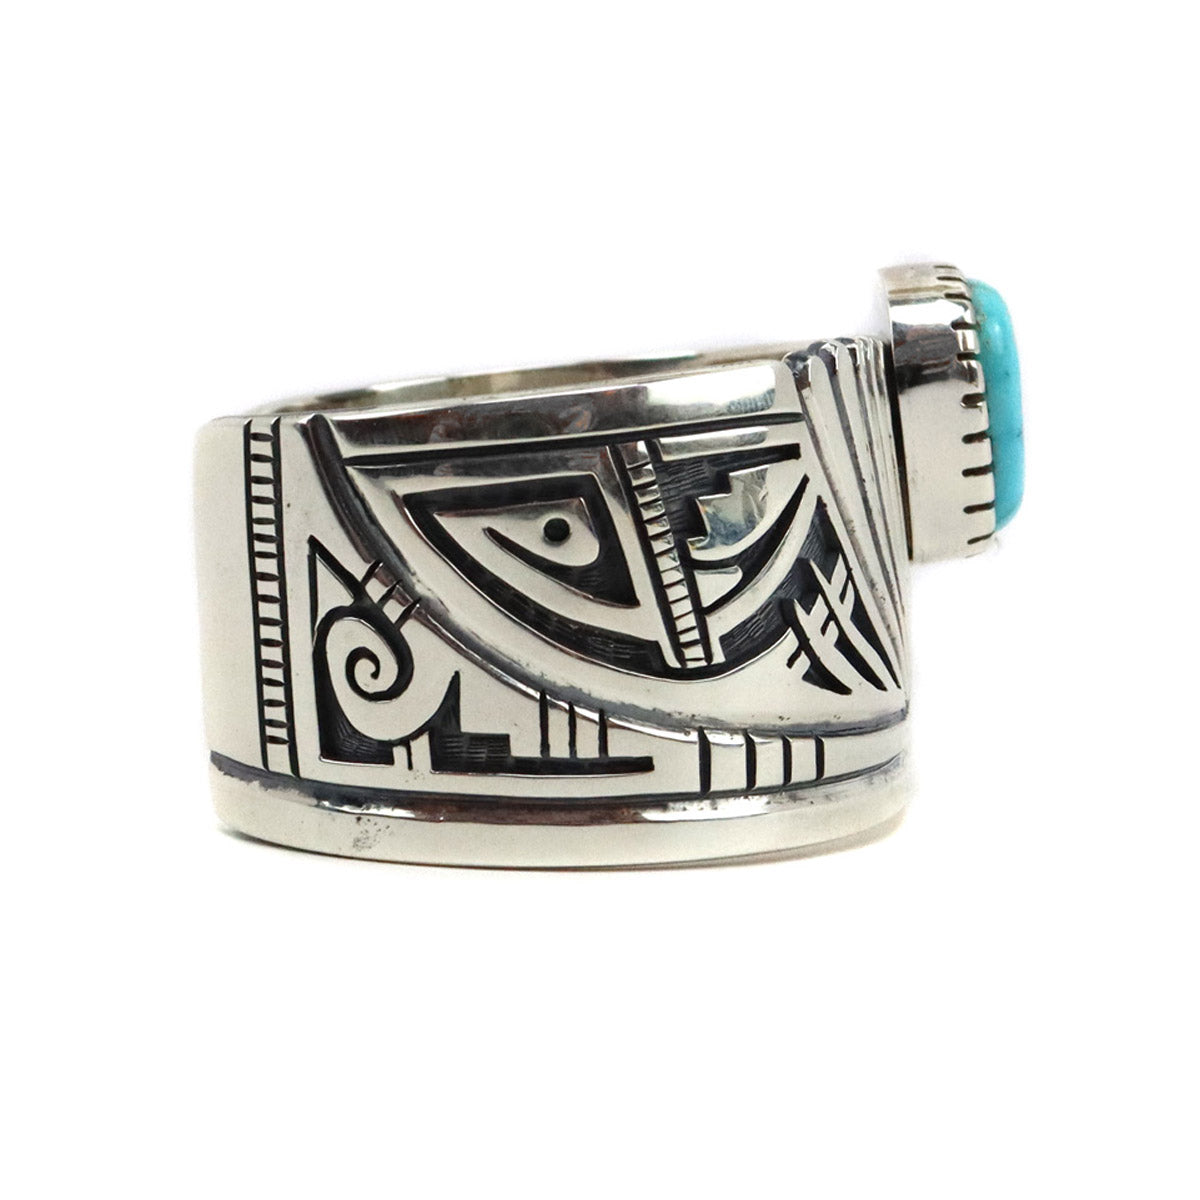 Roy Talahaftewa - Hopi Contemporary Morenci Turquoise and Sterling Silver Overlay Bracelet with Kachina Design, size 6.75 (J15538)